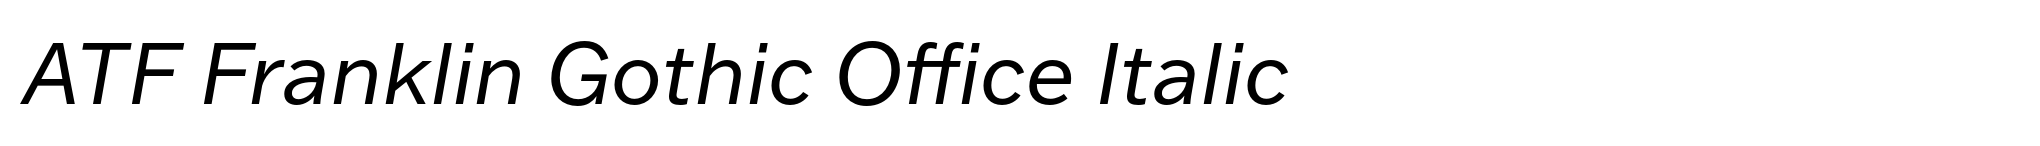 ATF Franklin Gothic Office Italic image